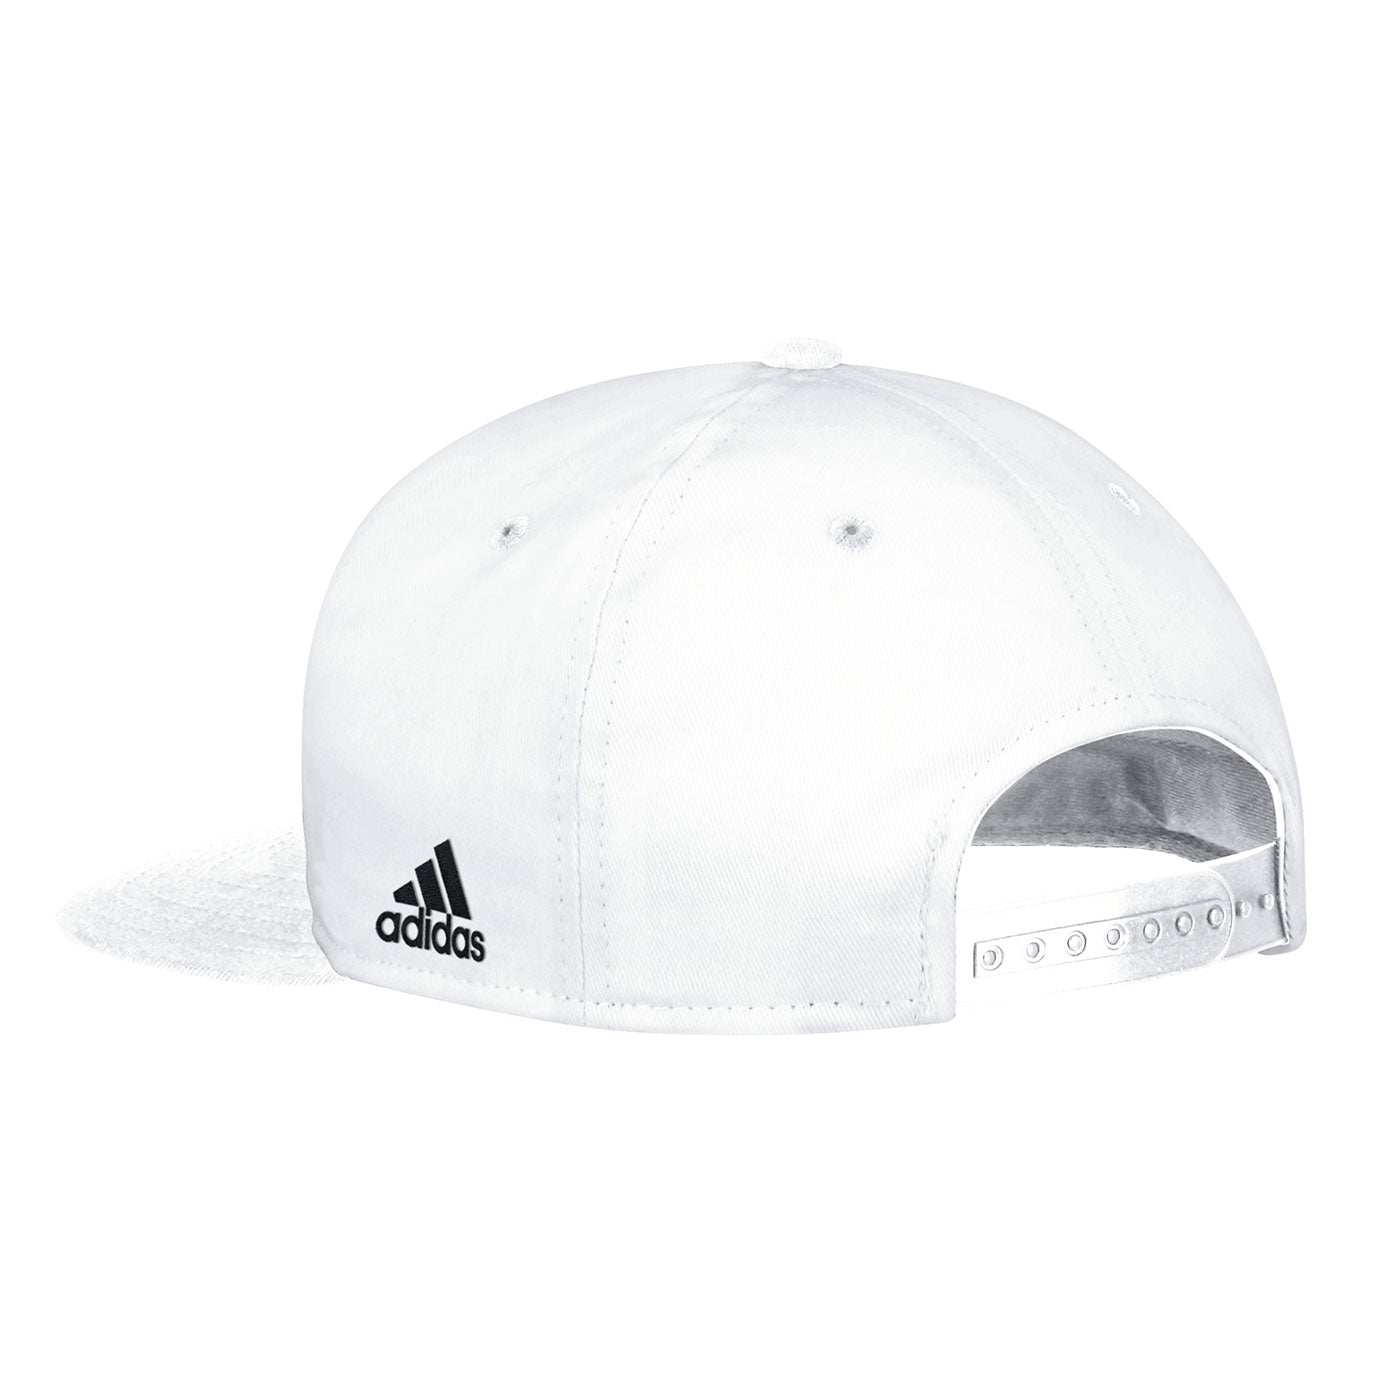 Golden State Warriors adidas 2017 NBA Finals Champions Snap Back - White